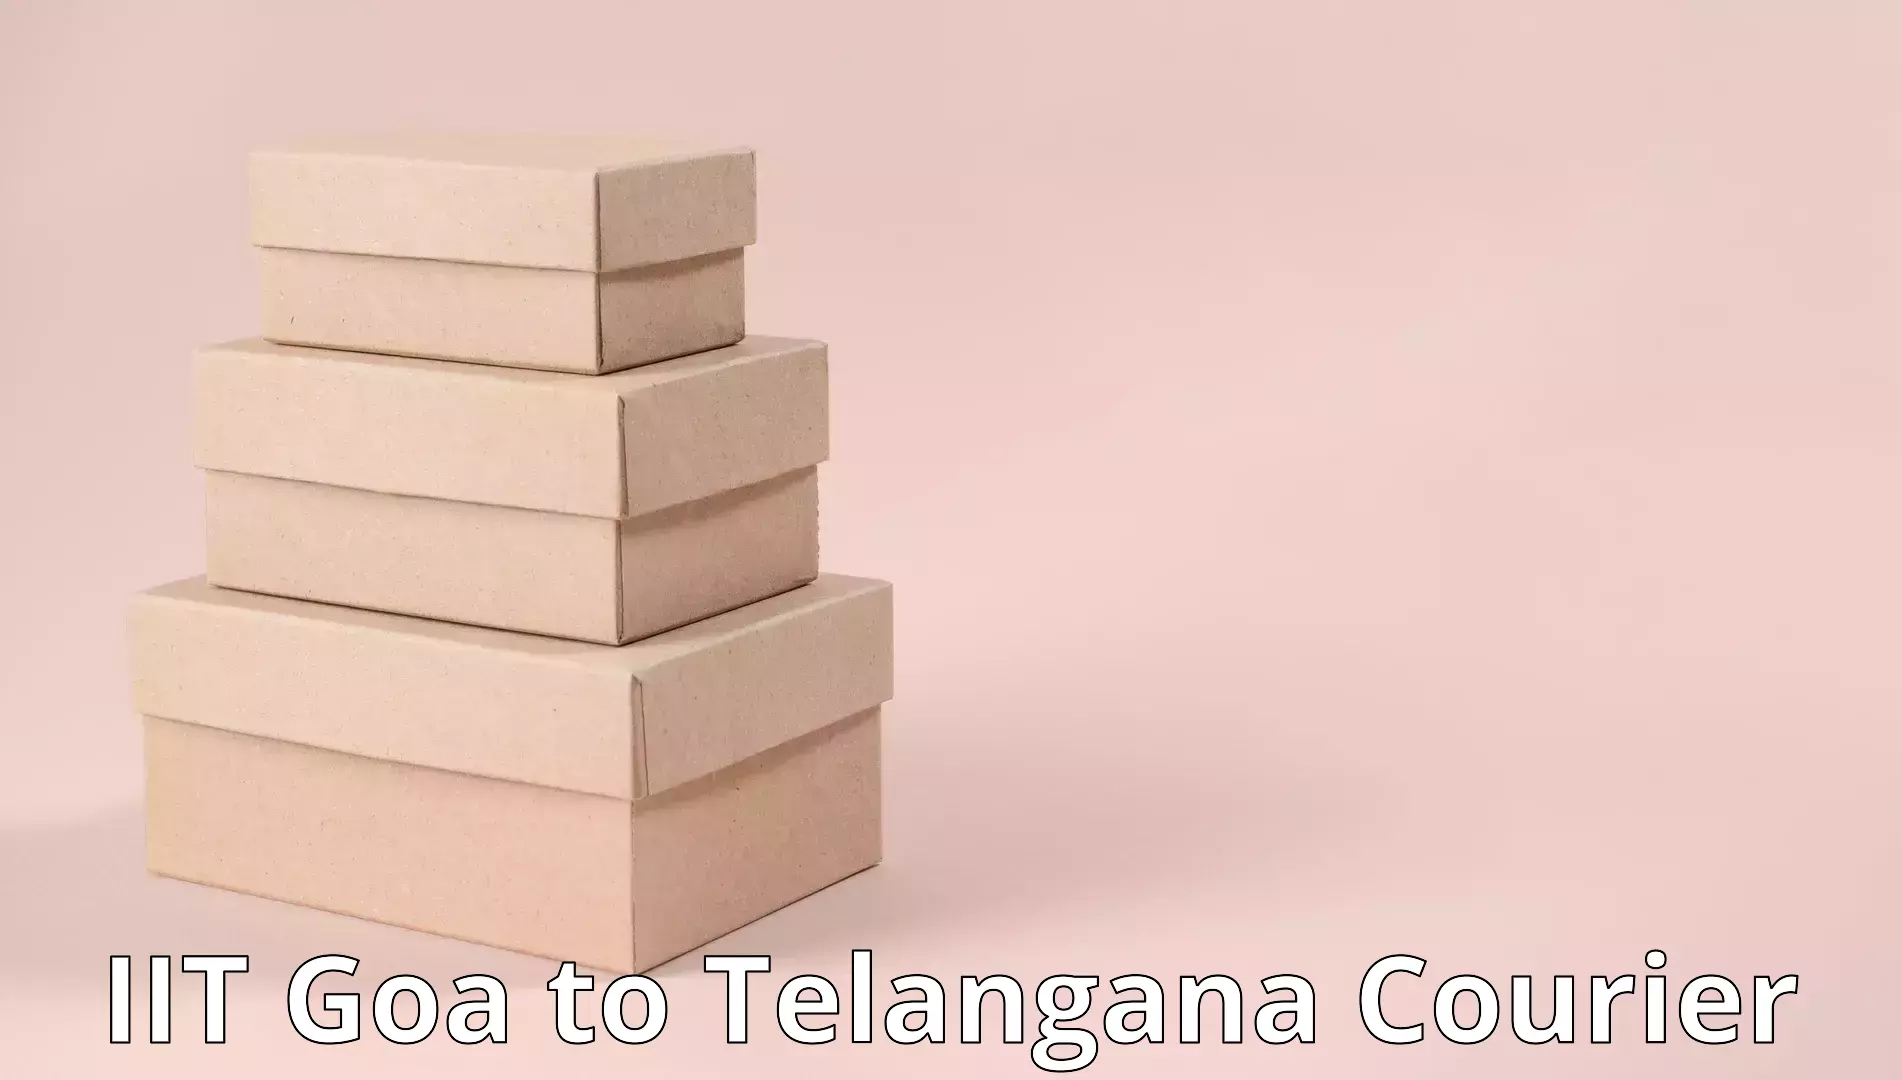 Reliable moving solutions IIT Goa to Gangadhara